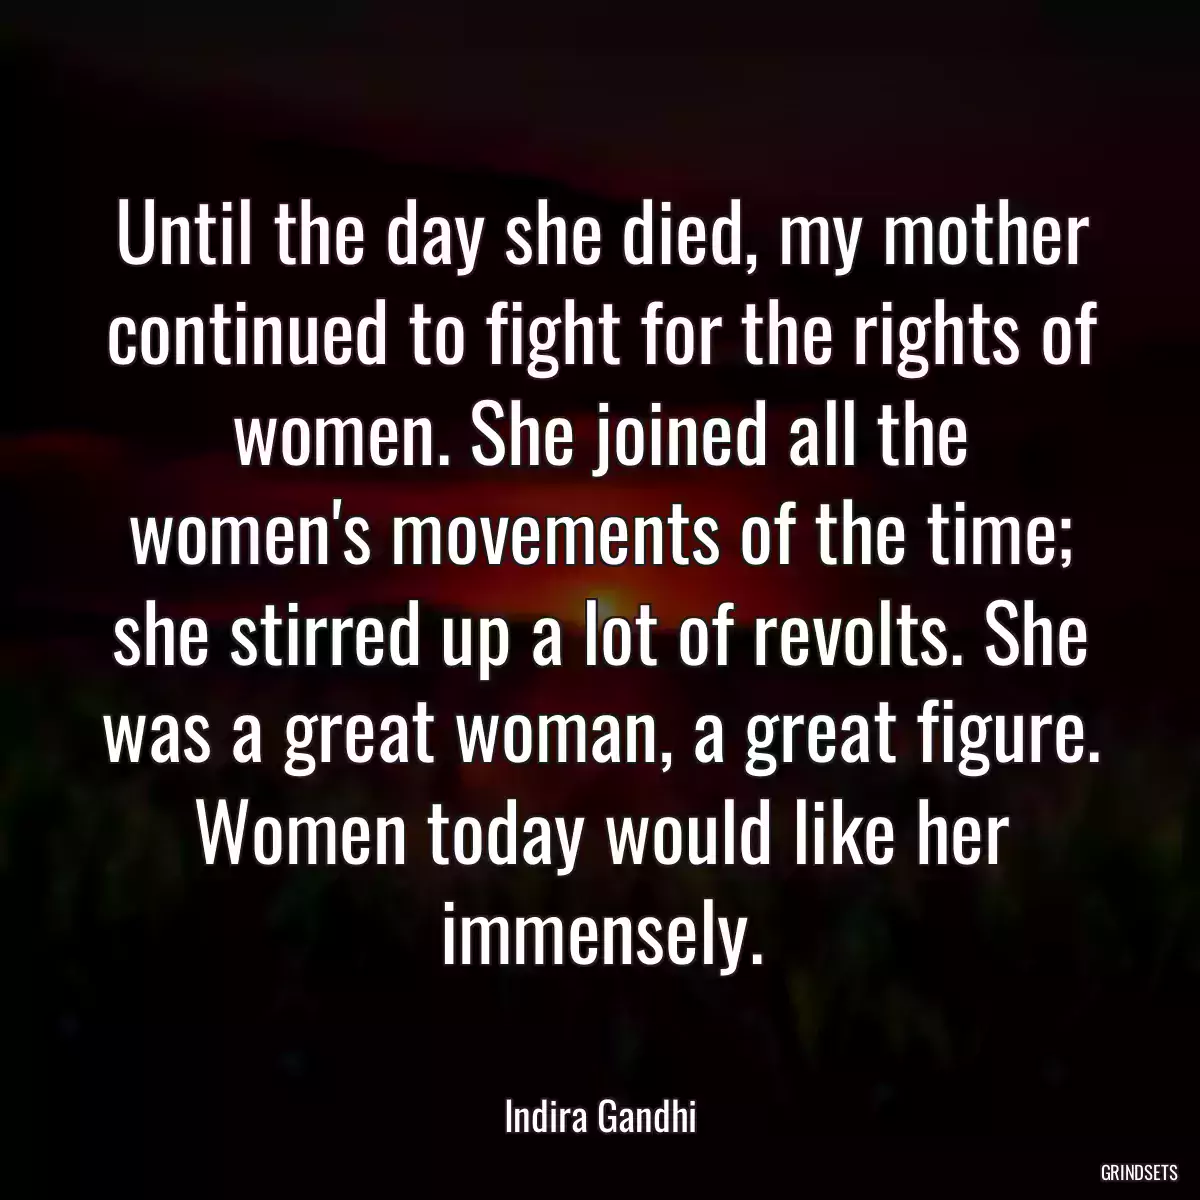 Until the day she died, my mother continued to fight for the rights of women. She joined all the women\'s movements of the time; she stirred up a lot of revolts. She was a great woman, a great figure. Women today would like her immensely.